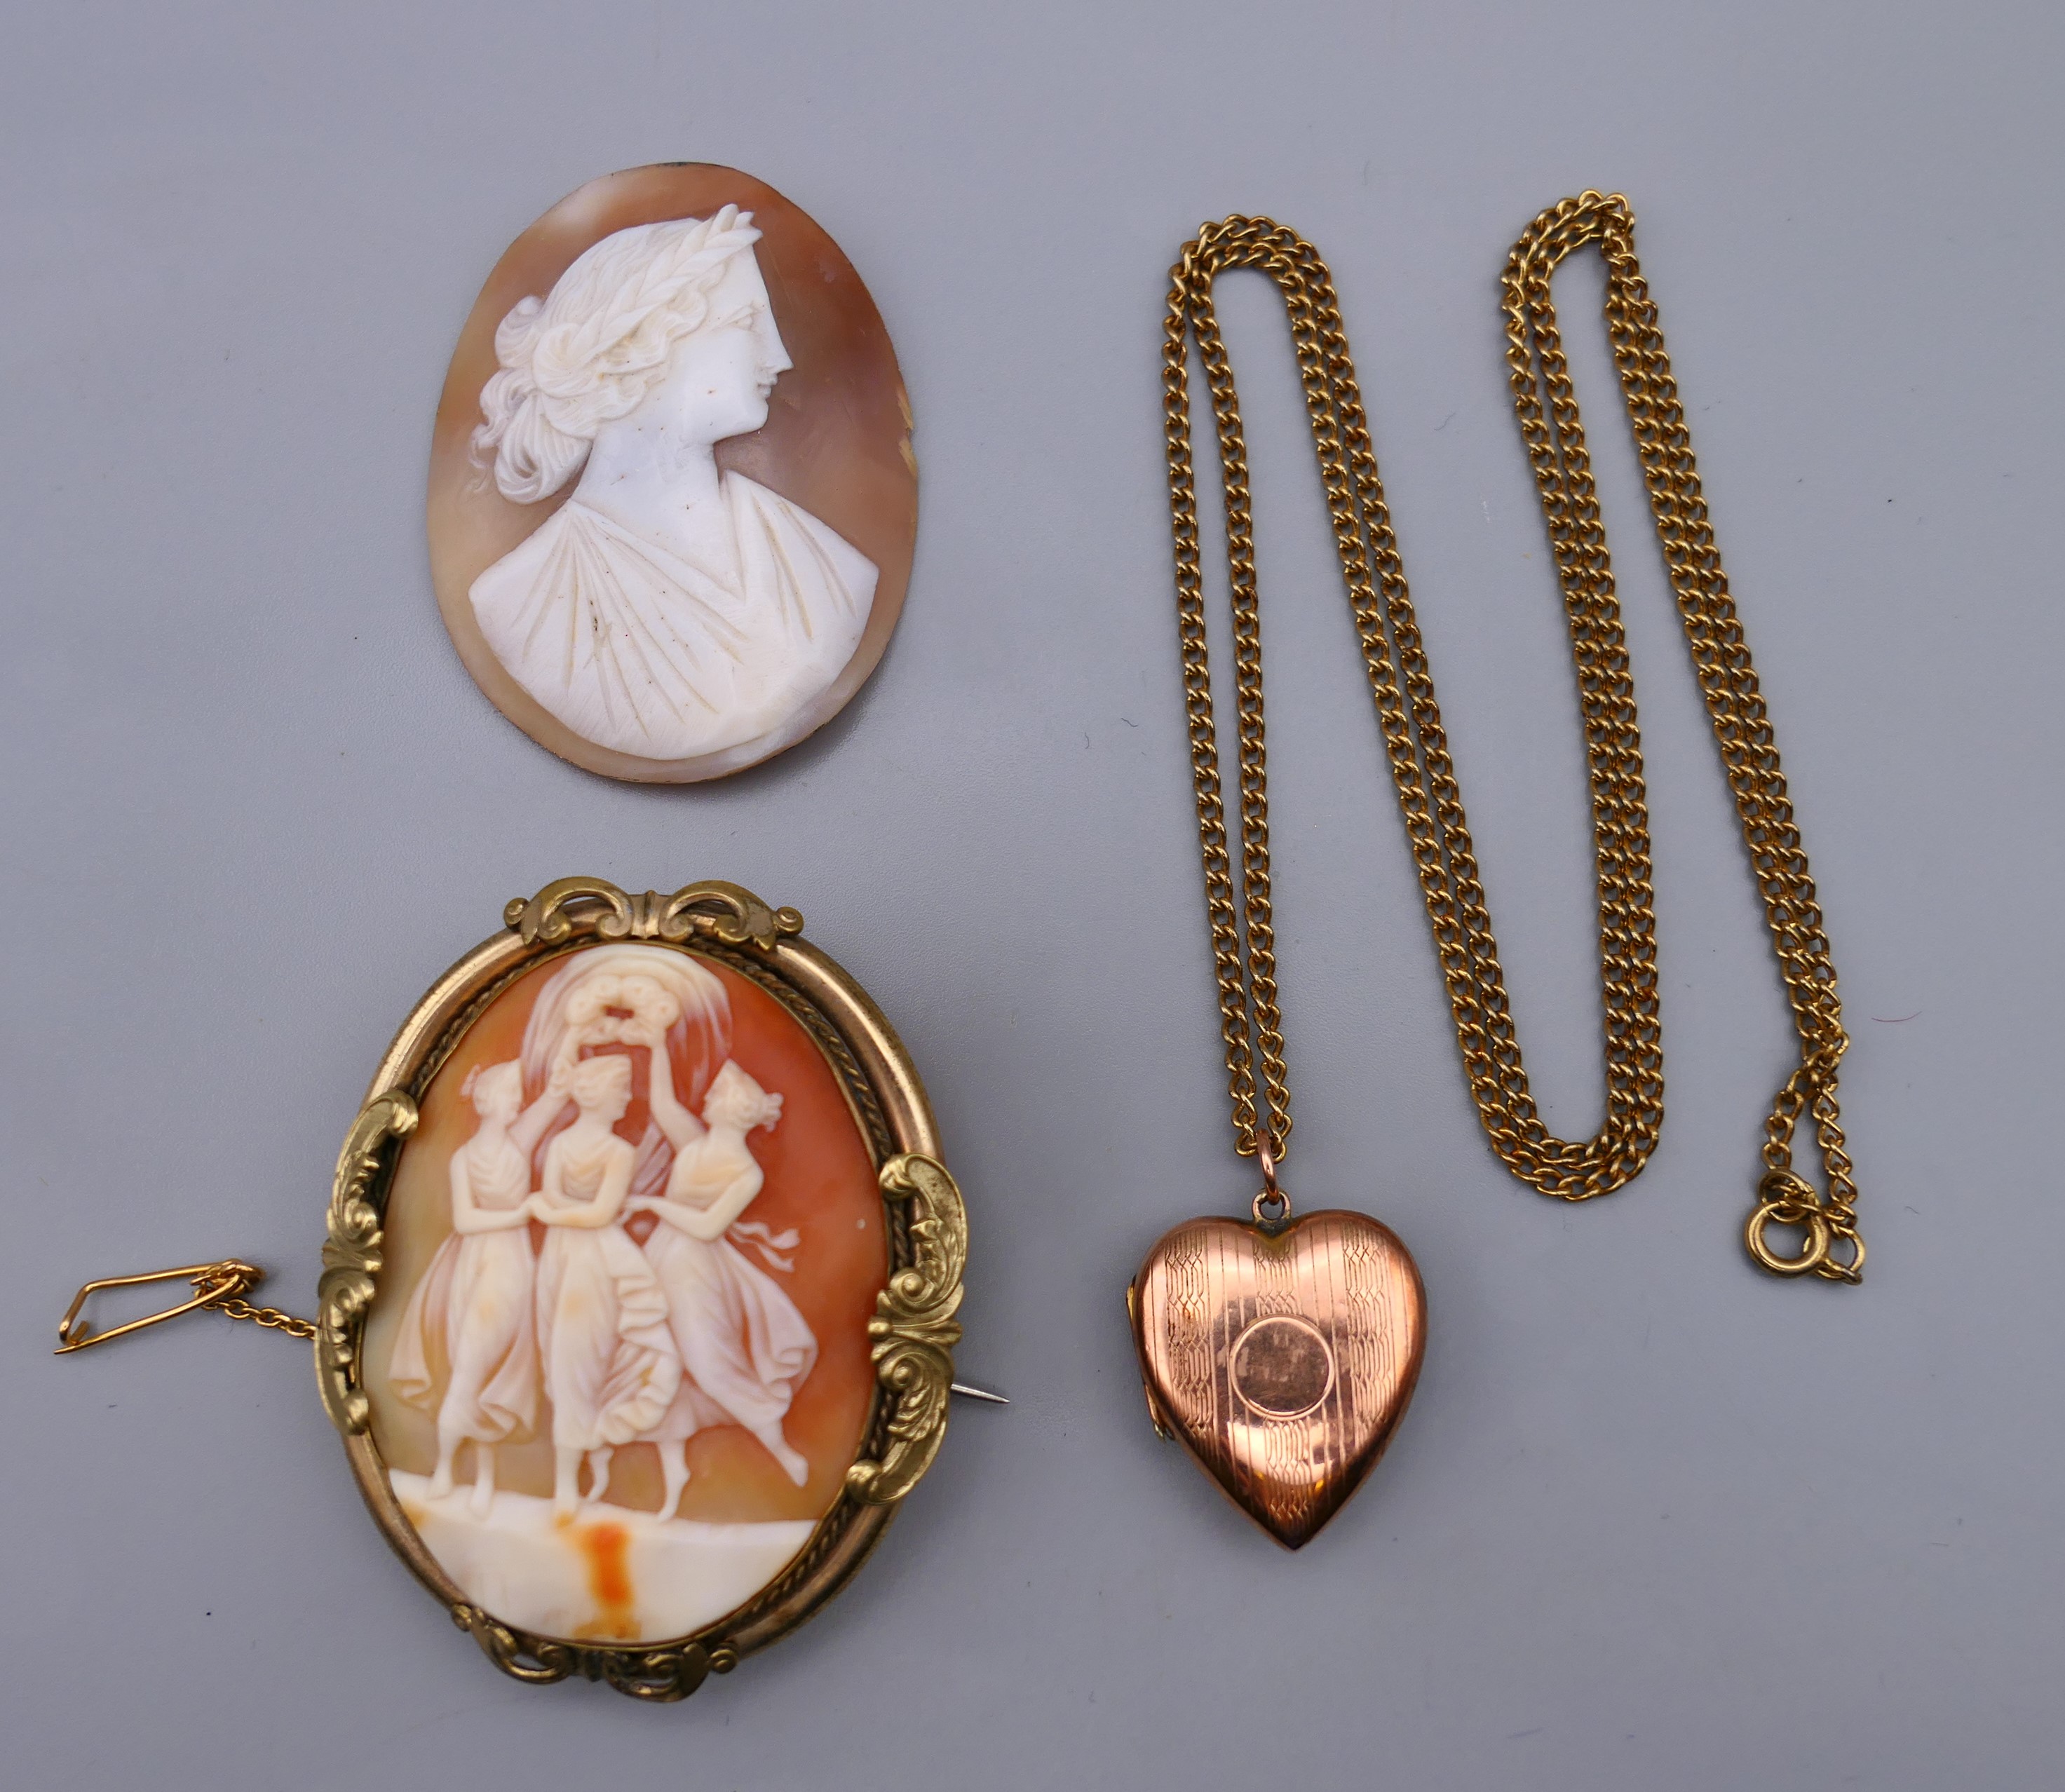 A cameo brooch, an unmounted cameo and a 9 ct gold back and front heart shaped locket on chain.